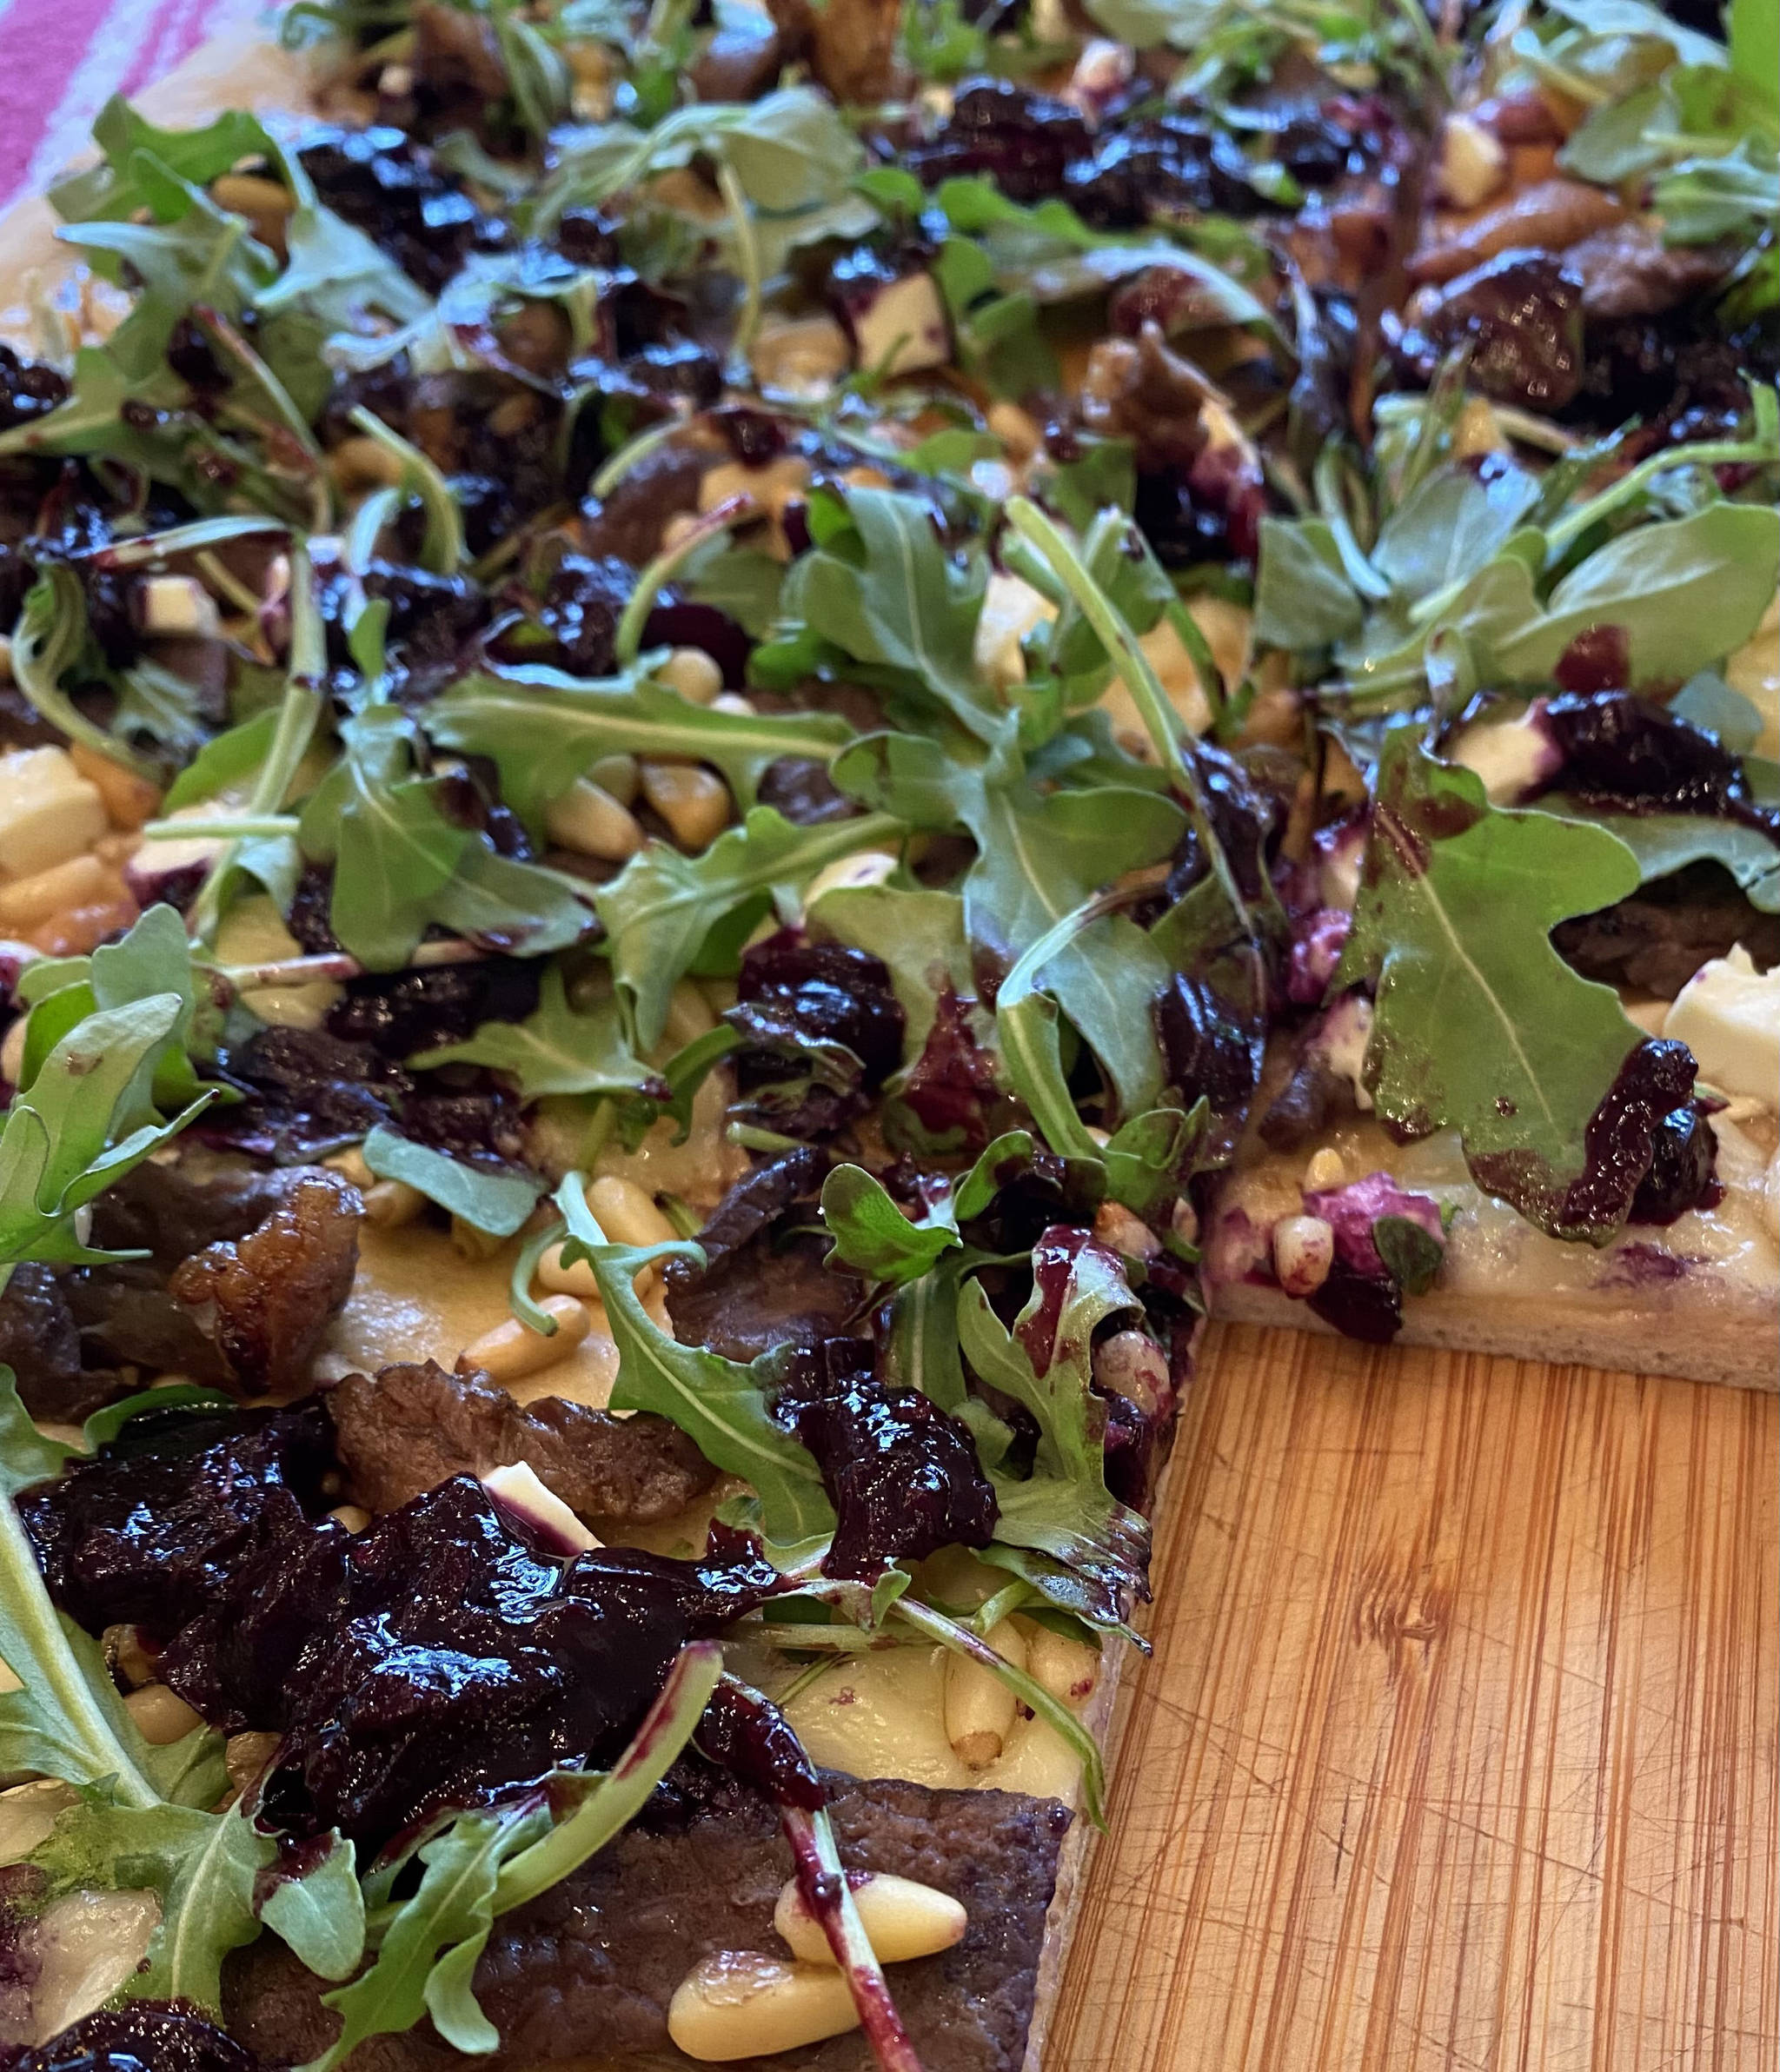 Arugula, pine nuts, and the blueberry relish top meats and homemade pizza dough. (Photo by Tress Dale/Peninsula Clarion)